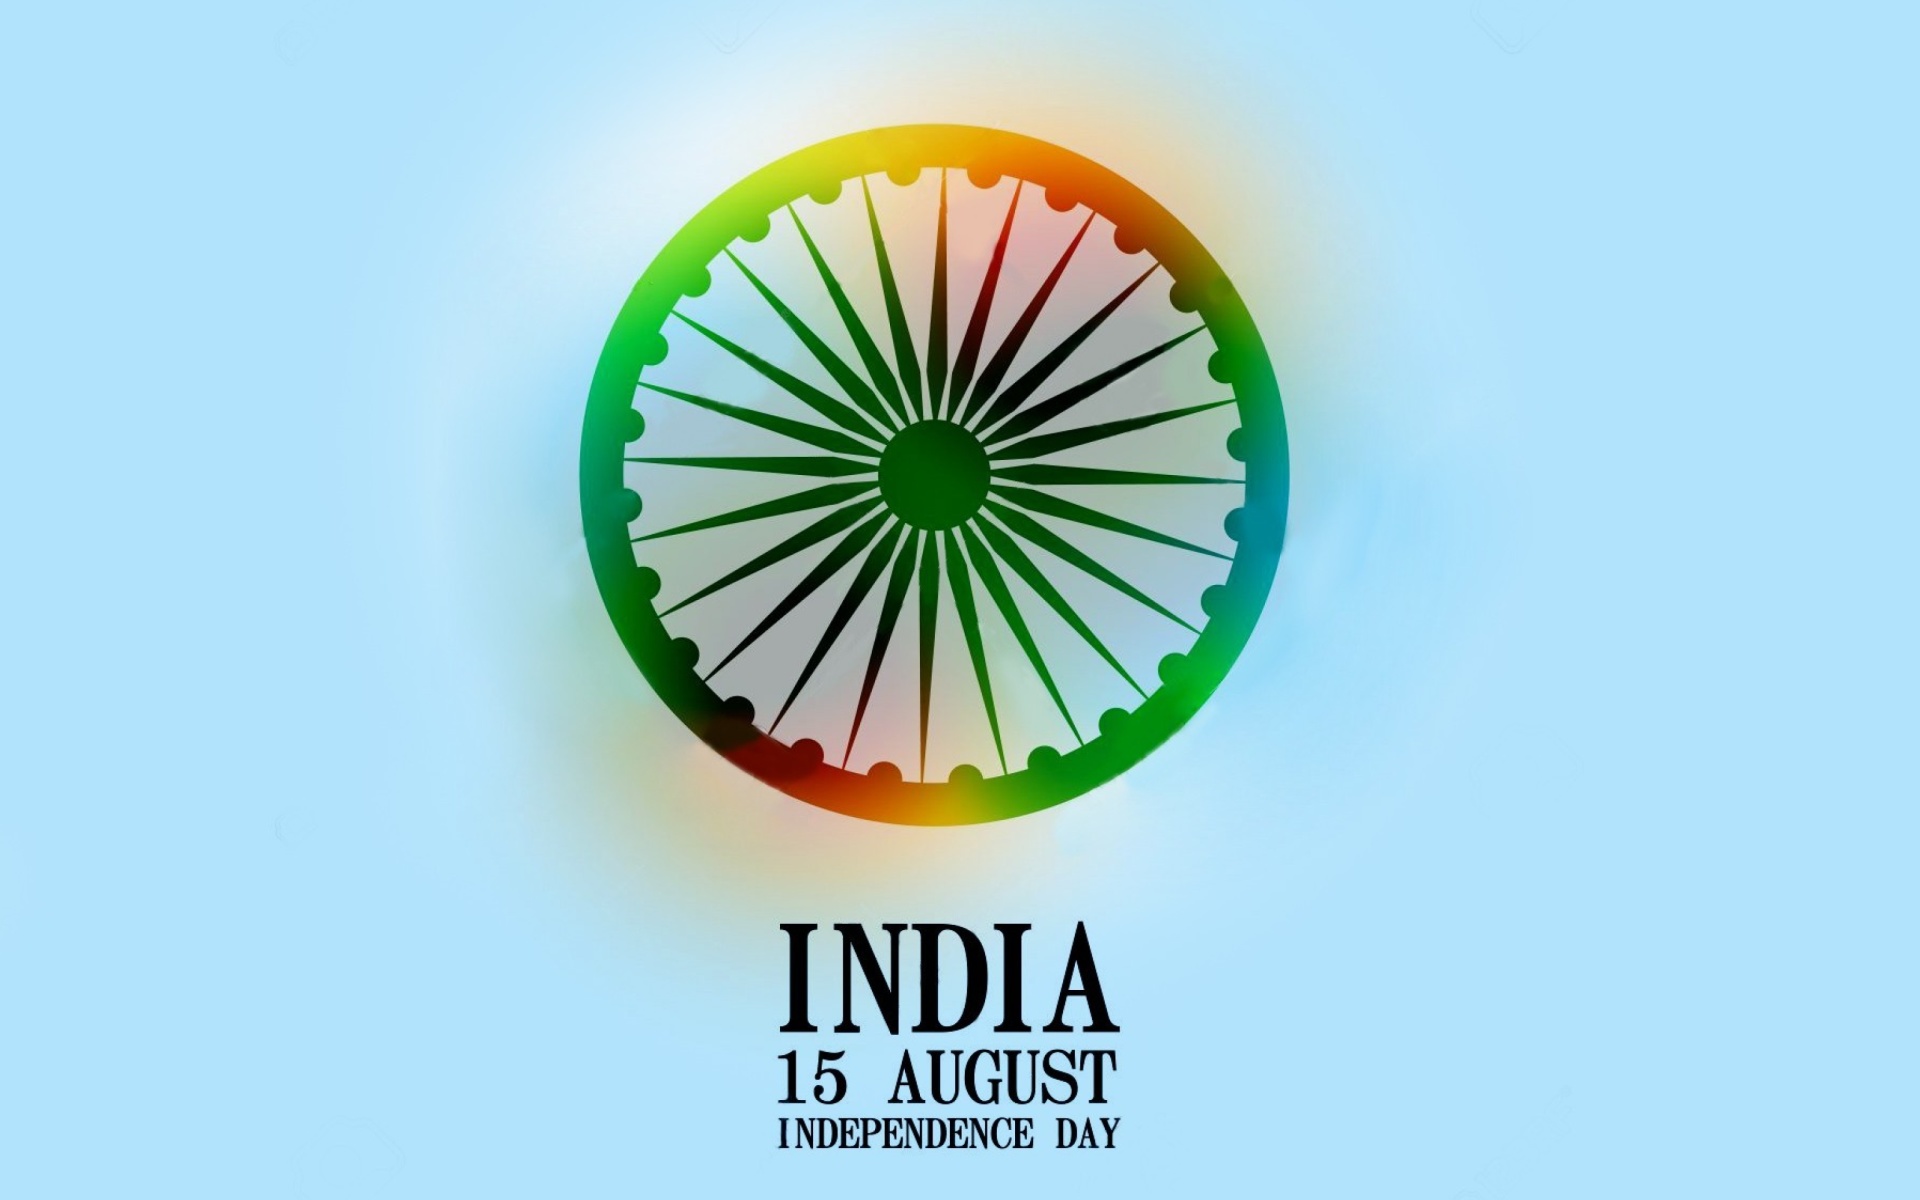 Обои India Independence Day 15 August 1920x1200